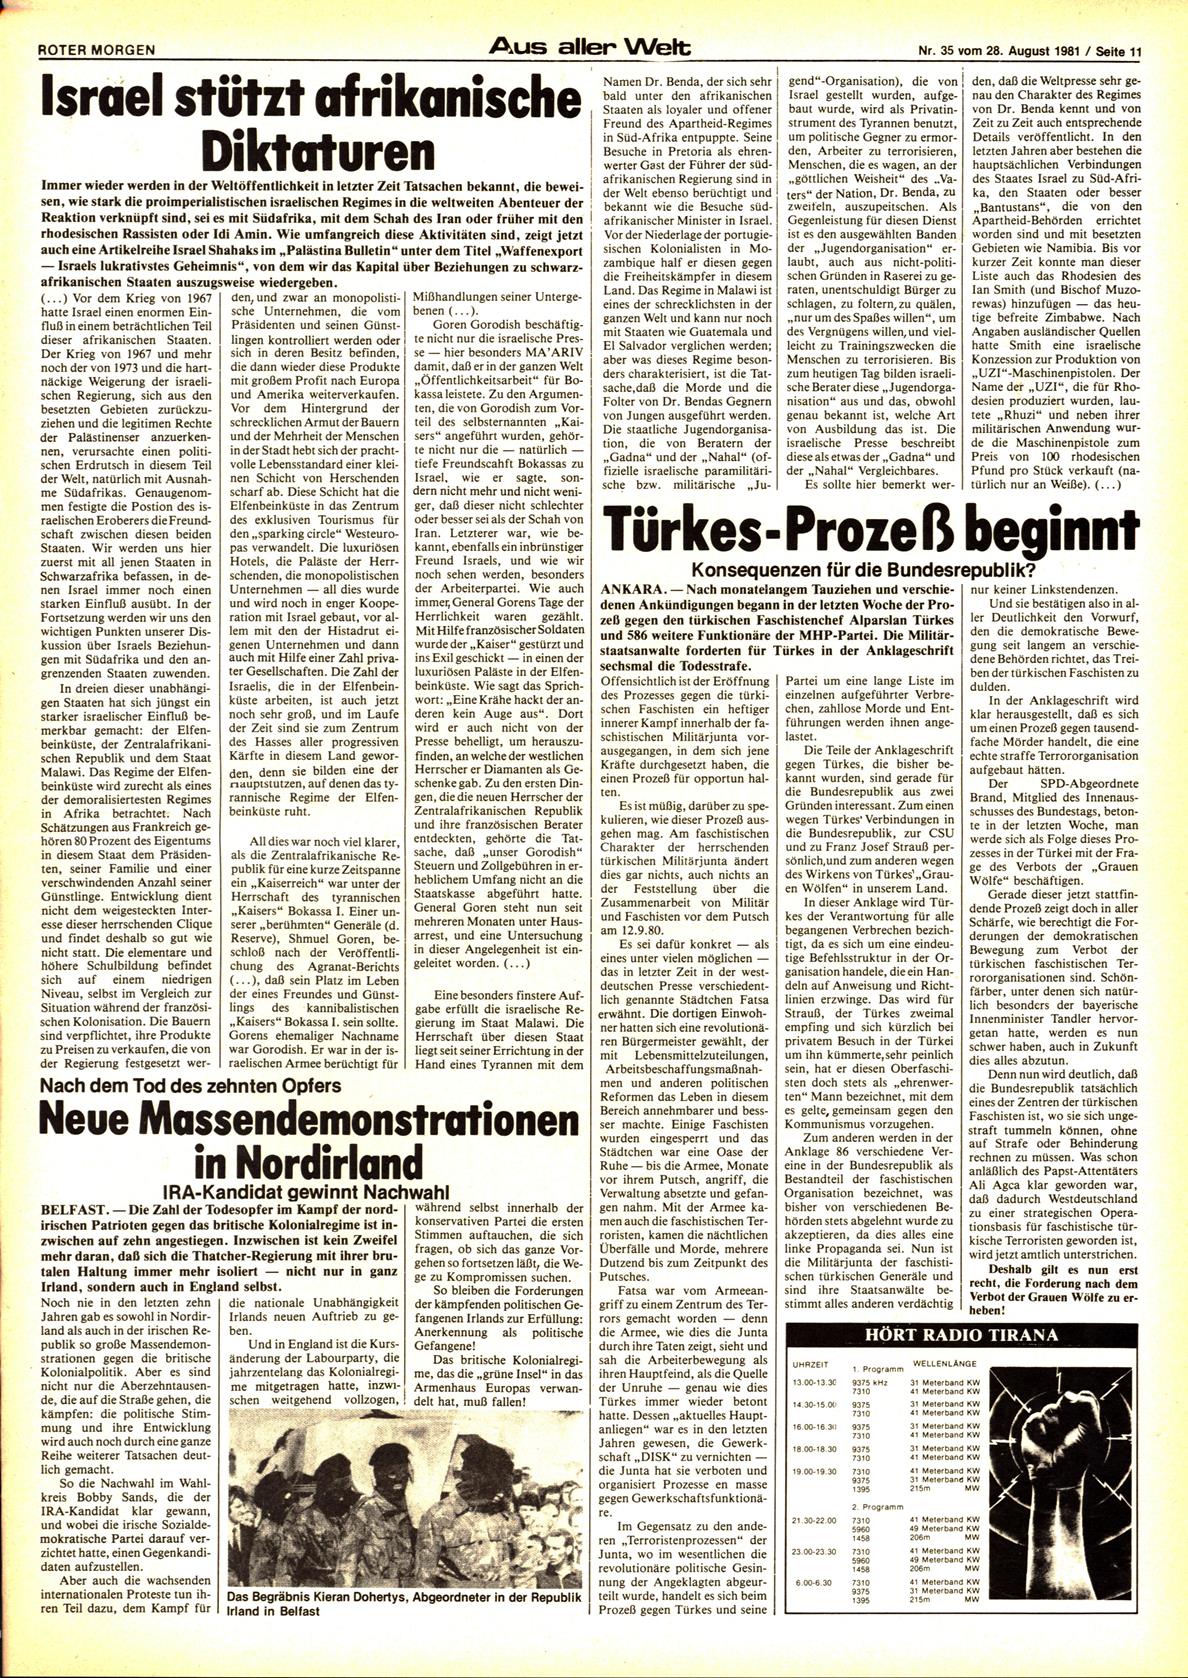 Roter Morgen, 15. Jg., 28. August 1981, Nr. 35, Seite 11